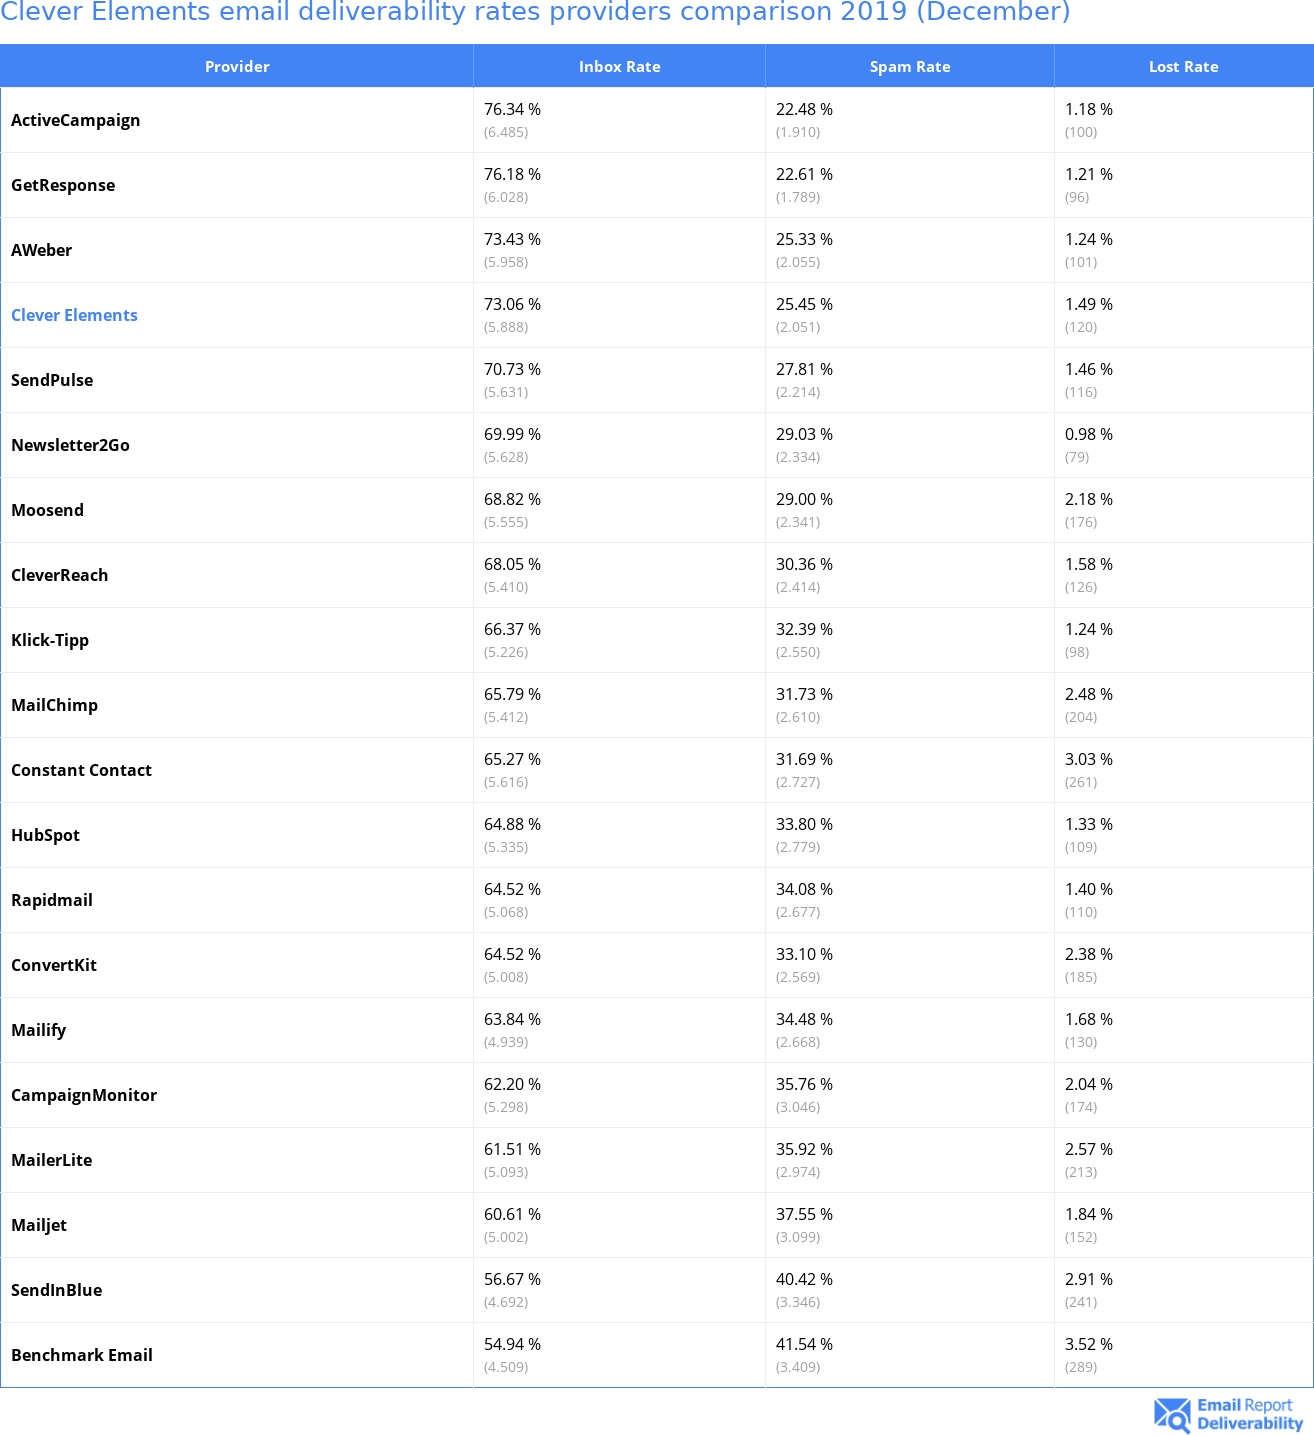 Clever Elements email deliverability rates providers comparison 2019 (December)